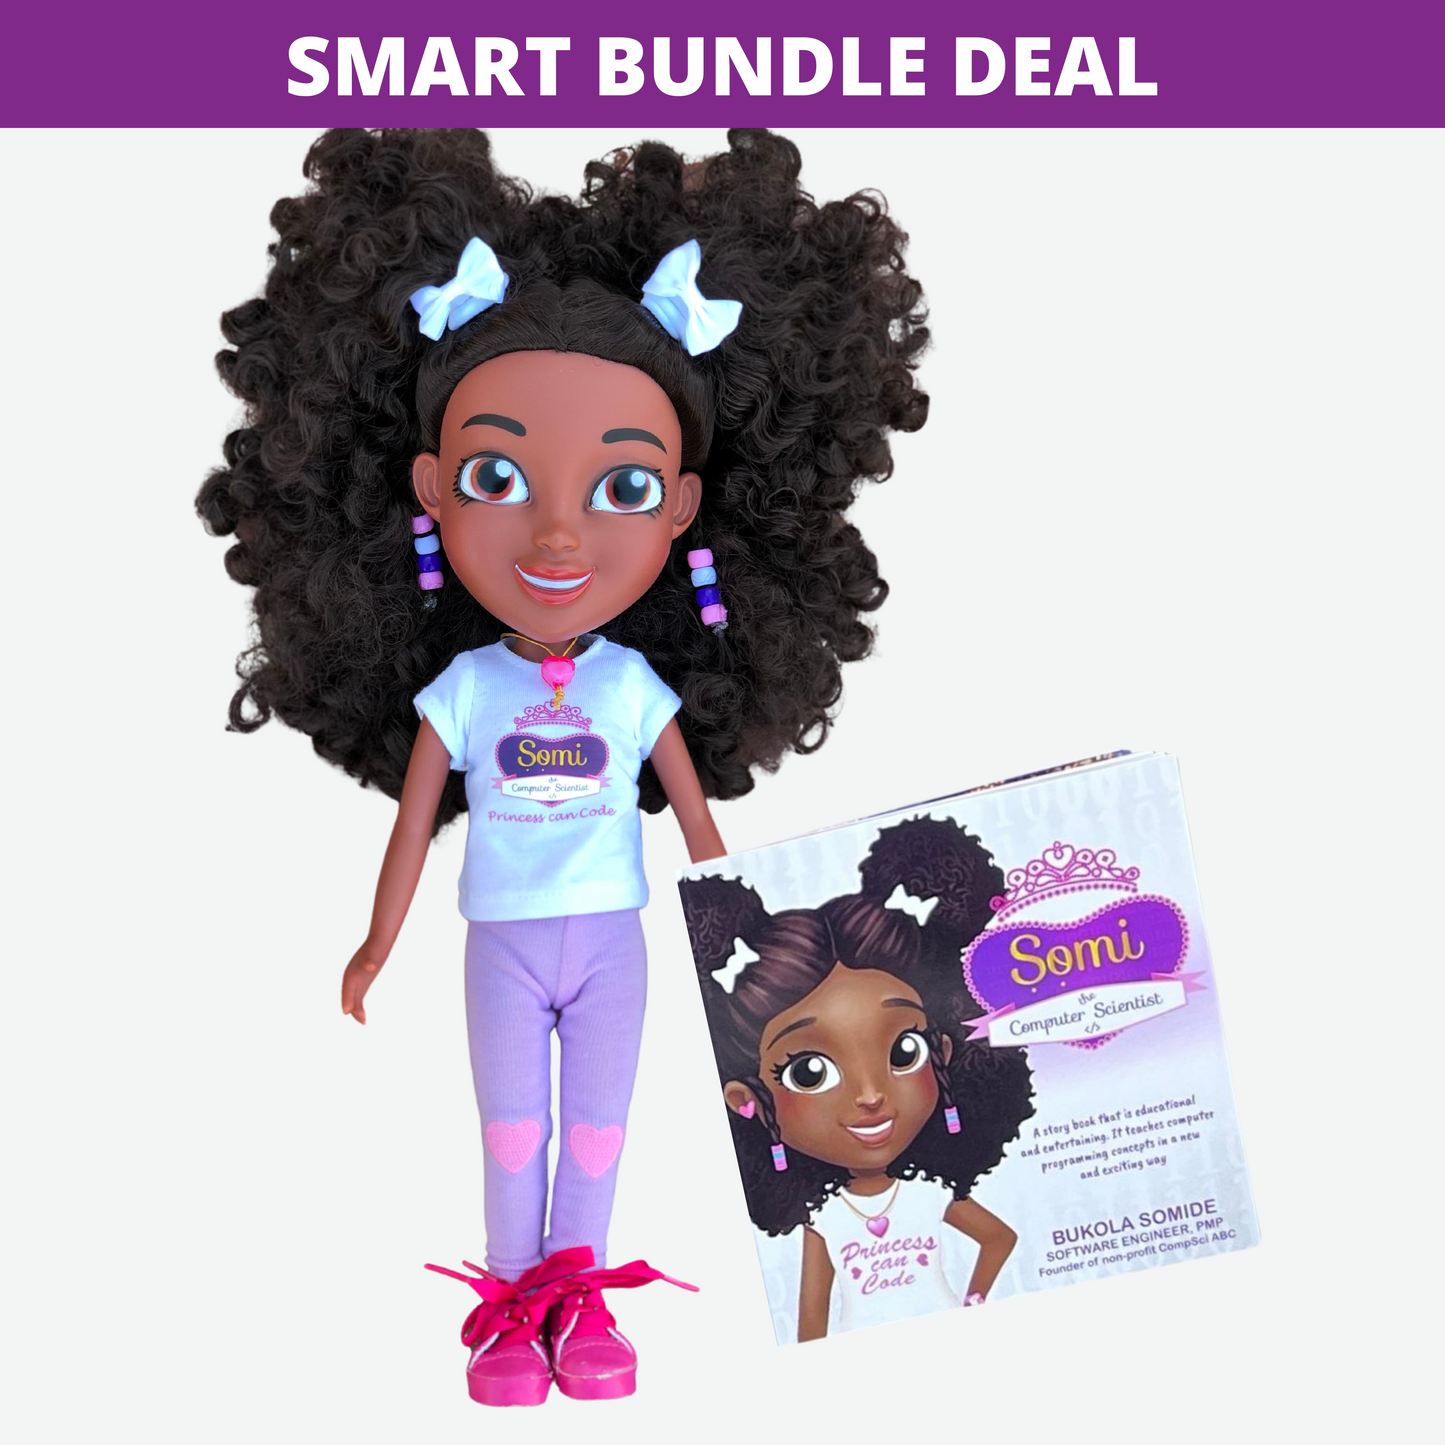 Maddy's Smart Bundle Kit: STEM Storybook with 14-inch Somi the Computer Scientist Interactive Doll